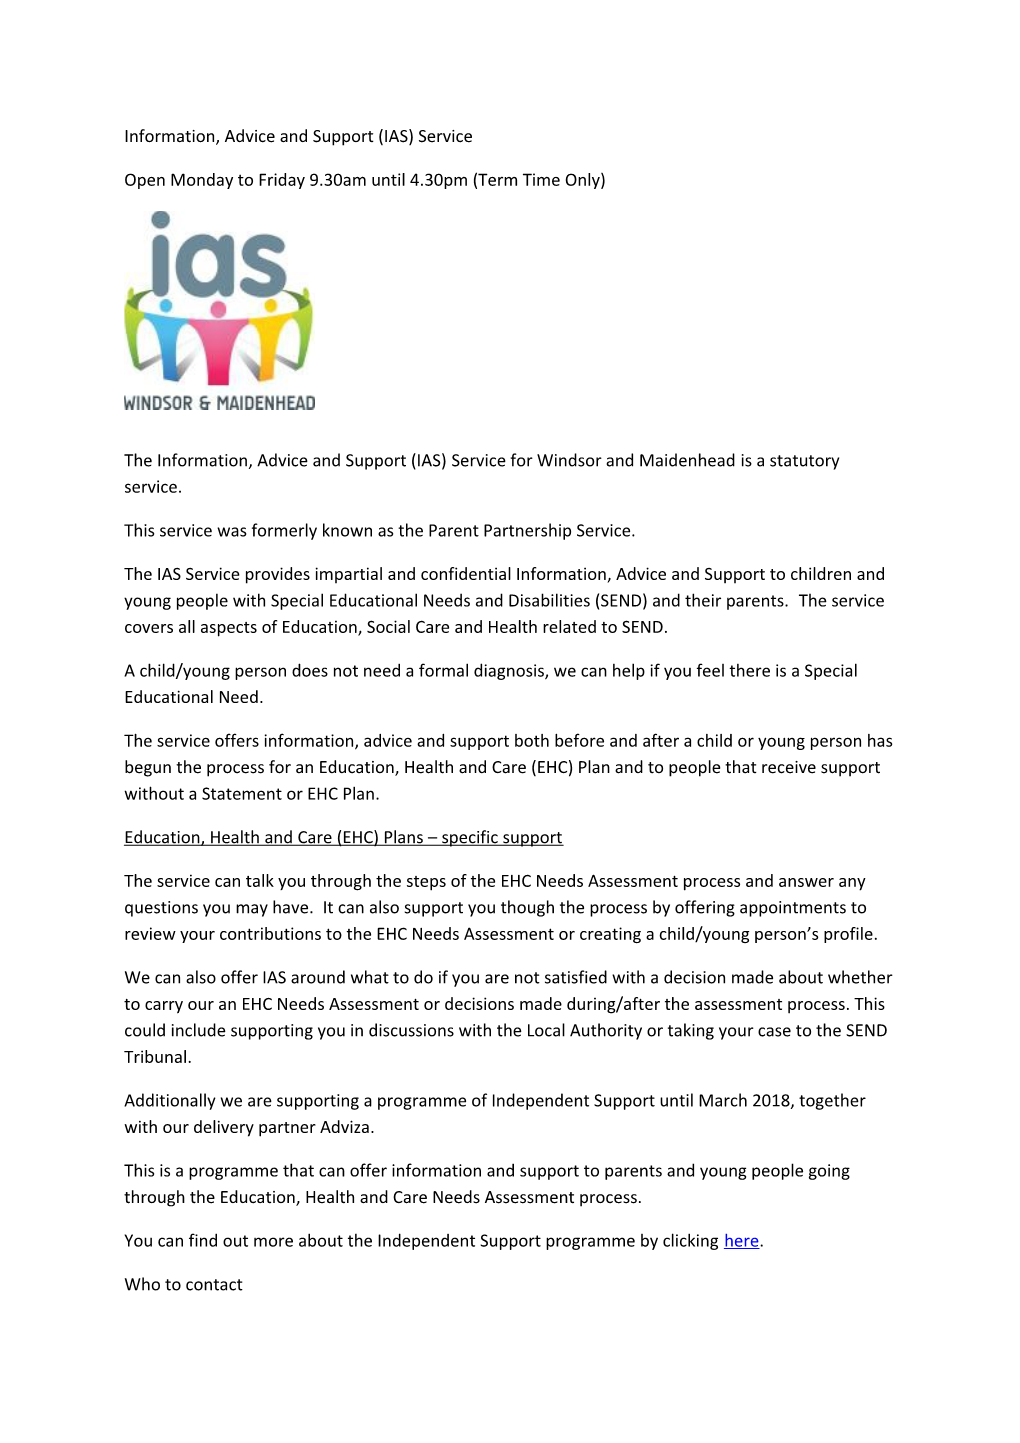 Information, Advice and Support (IAS) Service